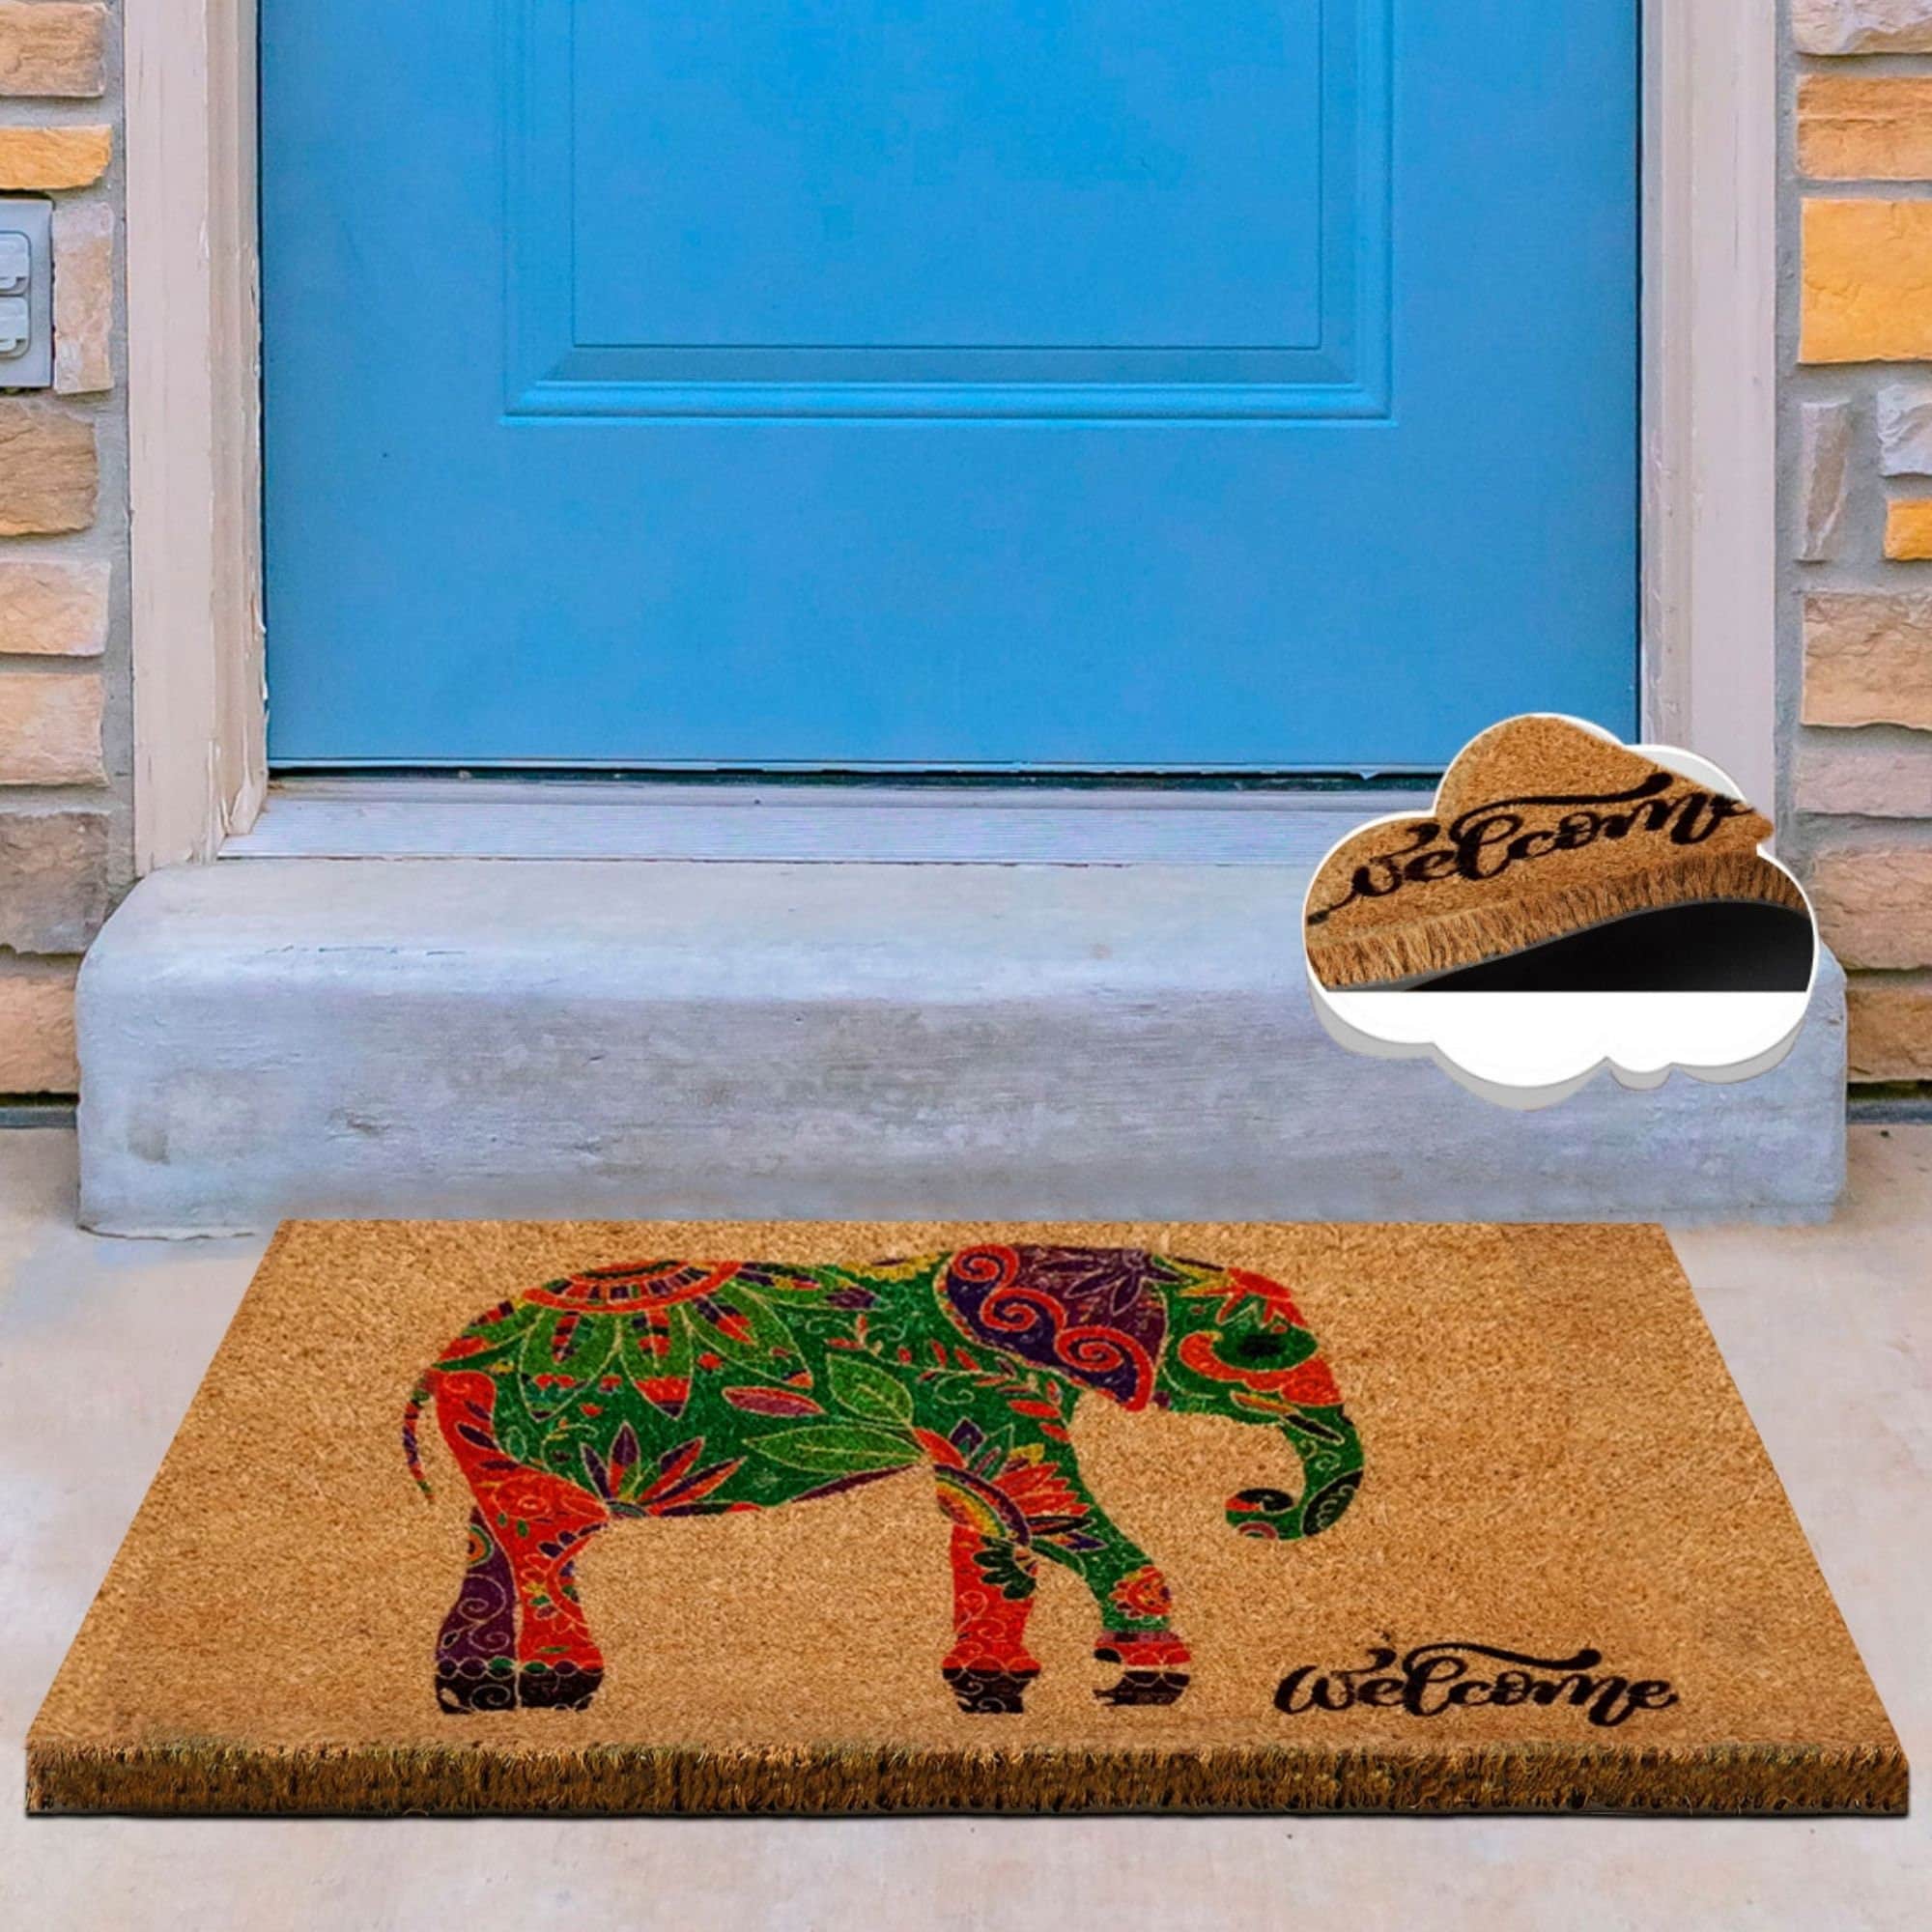 Infinity Custom Mats™ All-Weather Personalized Door Mat - STYLE